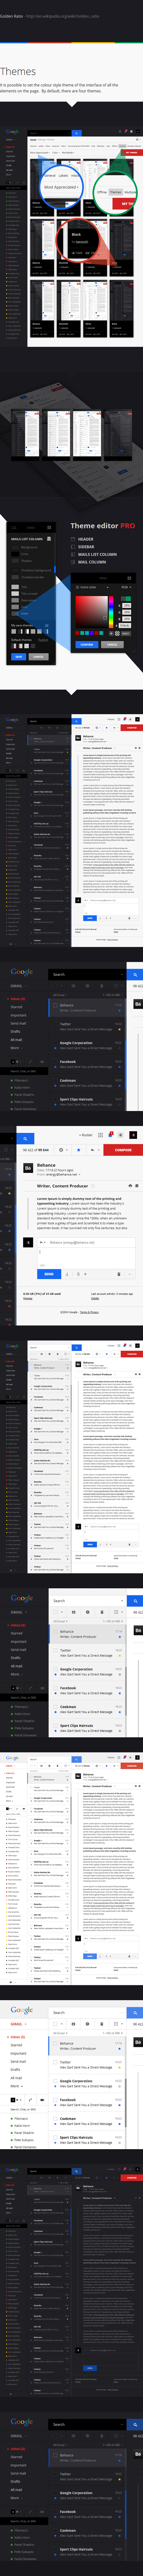 google GMail mail black White red Web UI ux Golden Ratio grid site webmail Email design